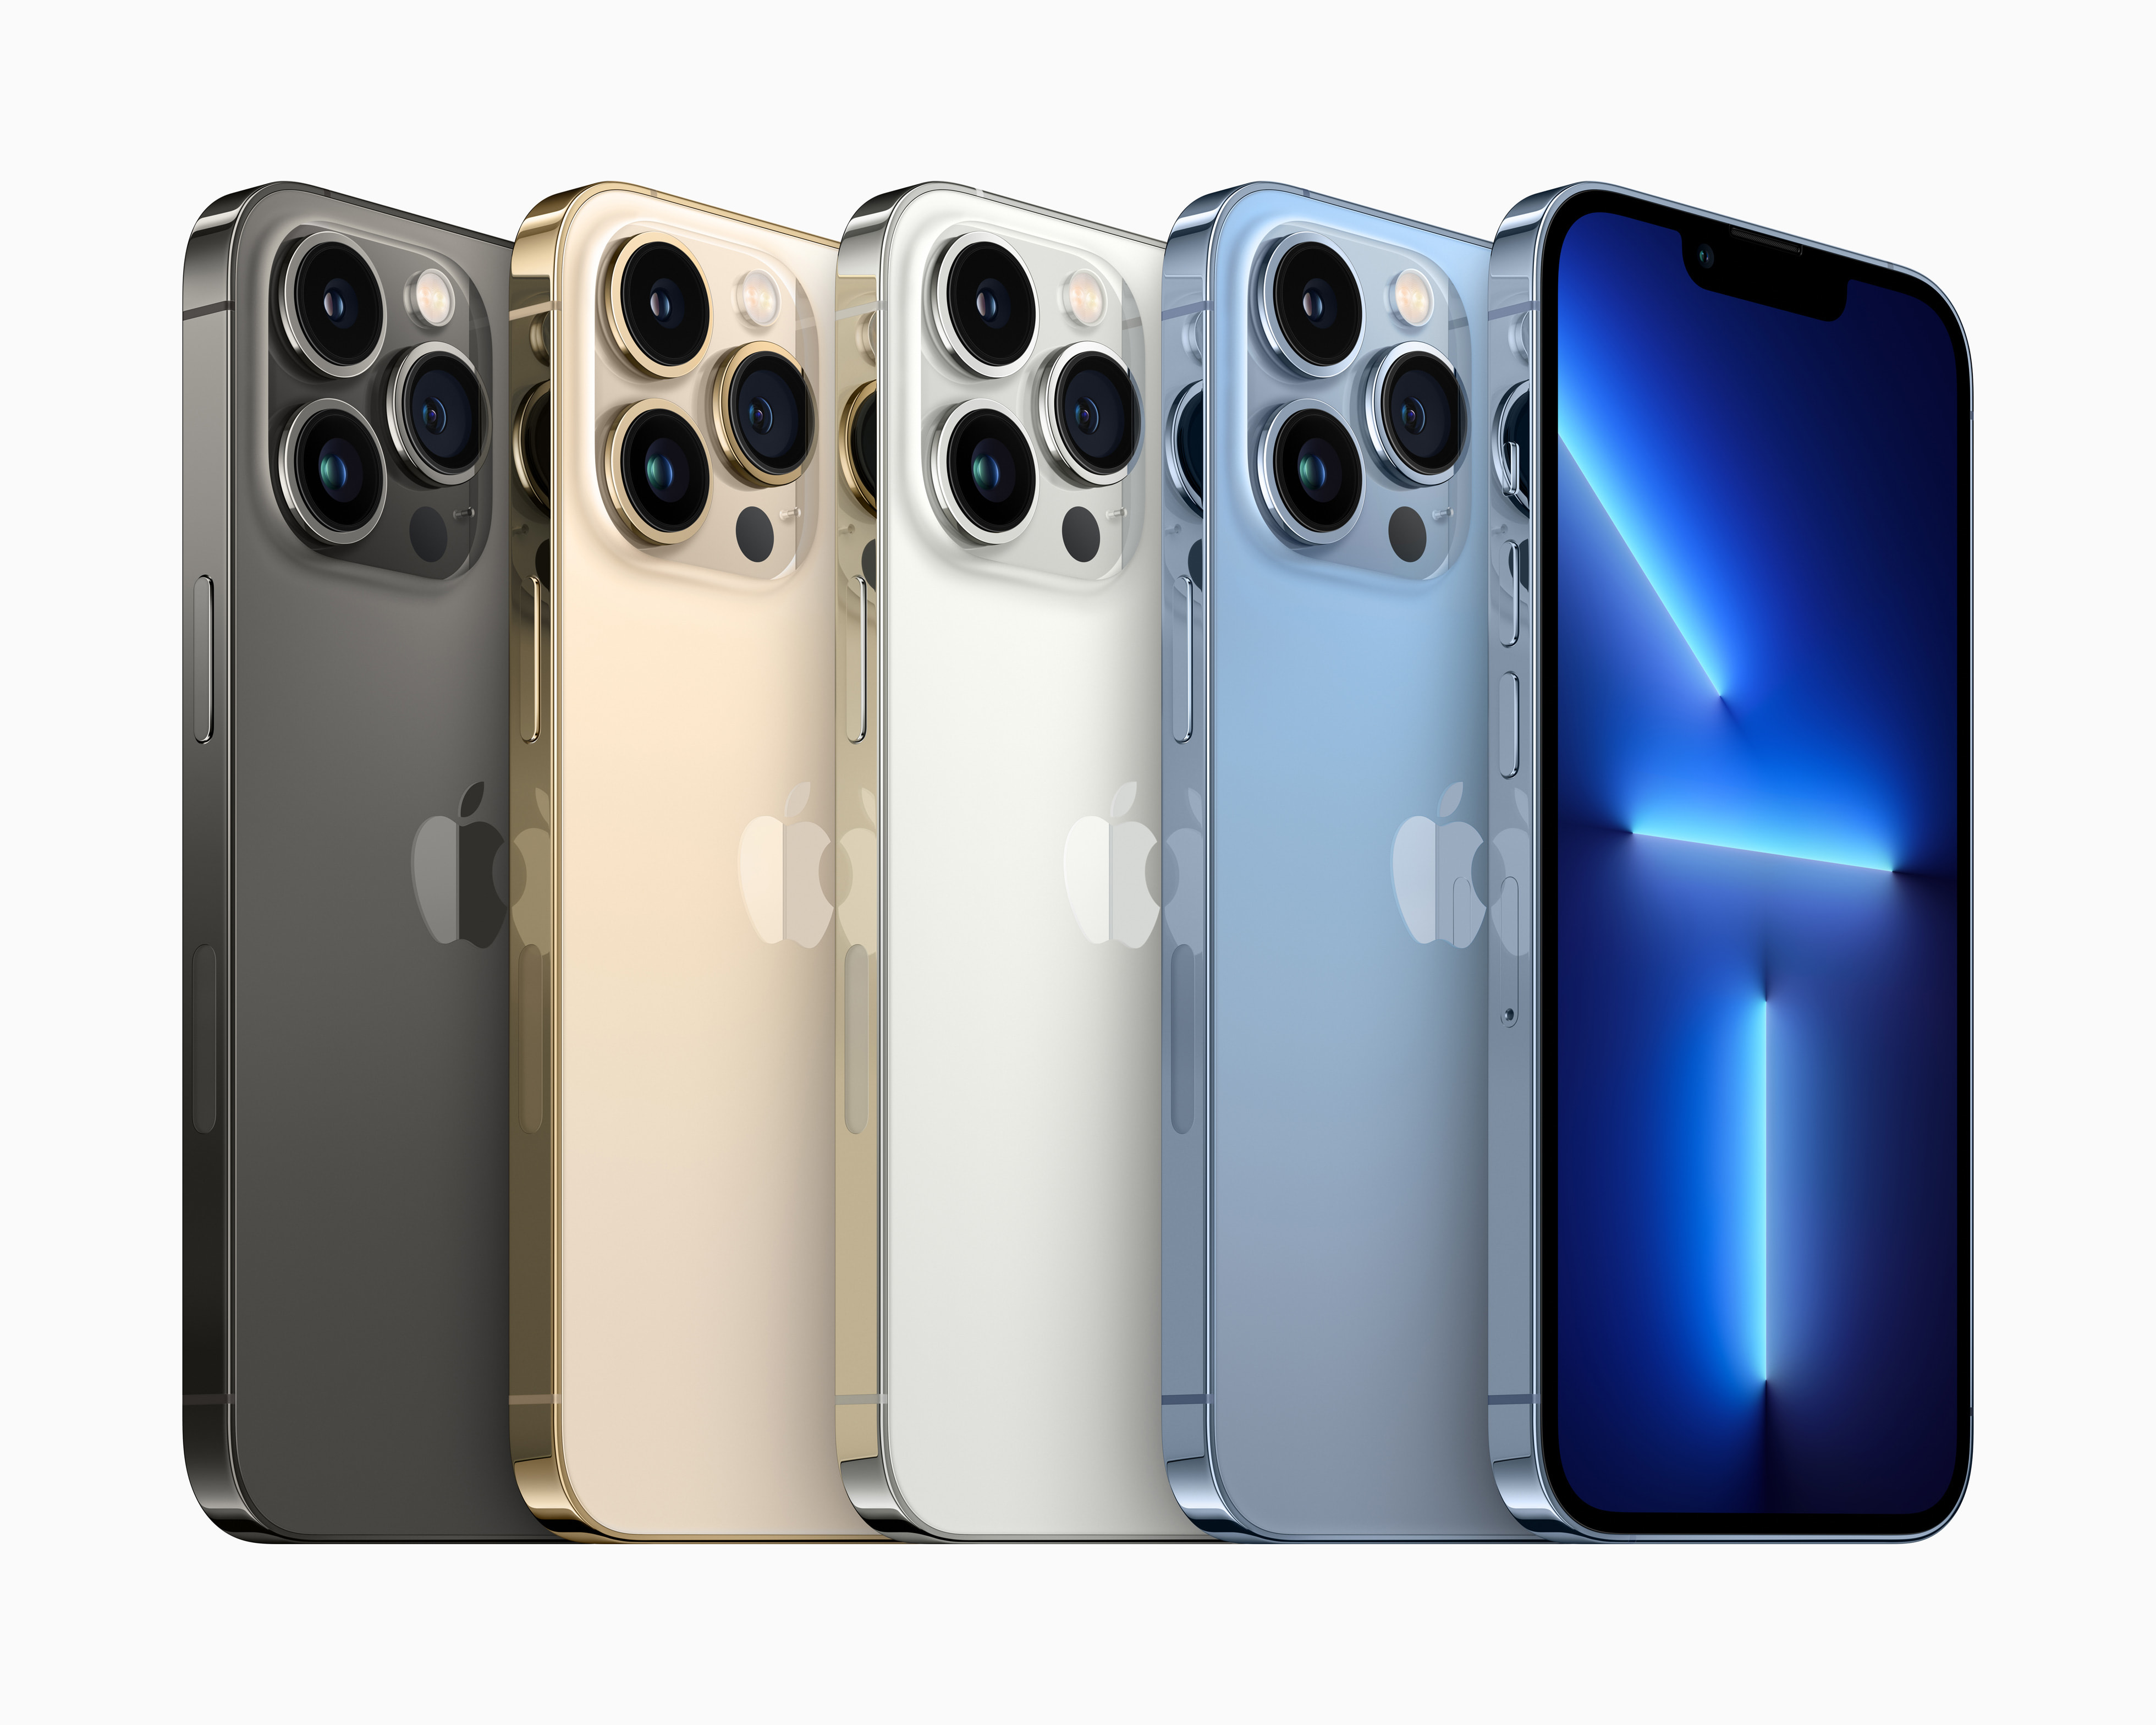 New Apple iPhone 15 Pro Max 5G: Deals, Prices, Colors & Specs